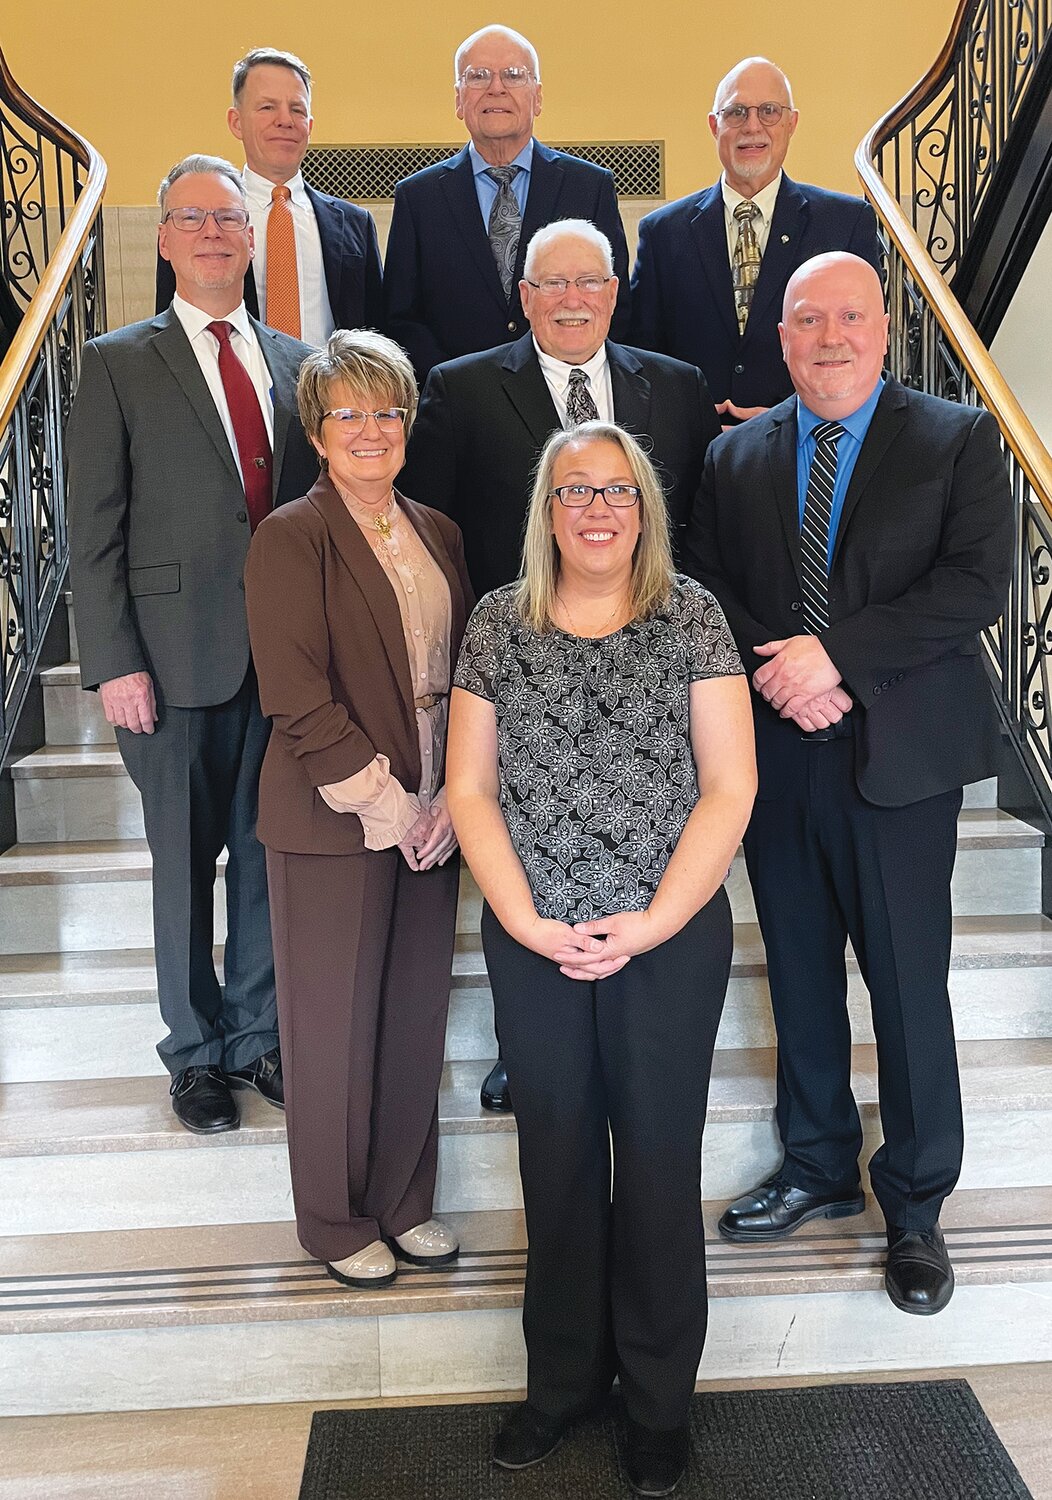 Newly sworn-in officeholders for the city of Crawfordsville are, from left, front row, Clerk-Treasurer Karyn Douglas; second row, Councilwoman Jennifer Lowe and Mayor Todd Barton; third row, Councilmen Jeff Lucas and Stan Hamilton; and back row, Councilmen Ethan Hollander, Mike Reidy and Andy Biddle. Not pictured is Councilman Kent Priebe.